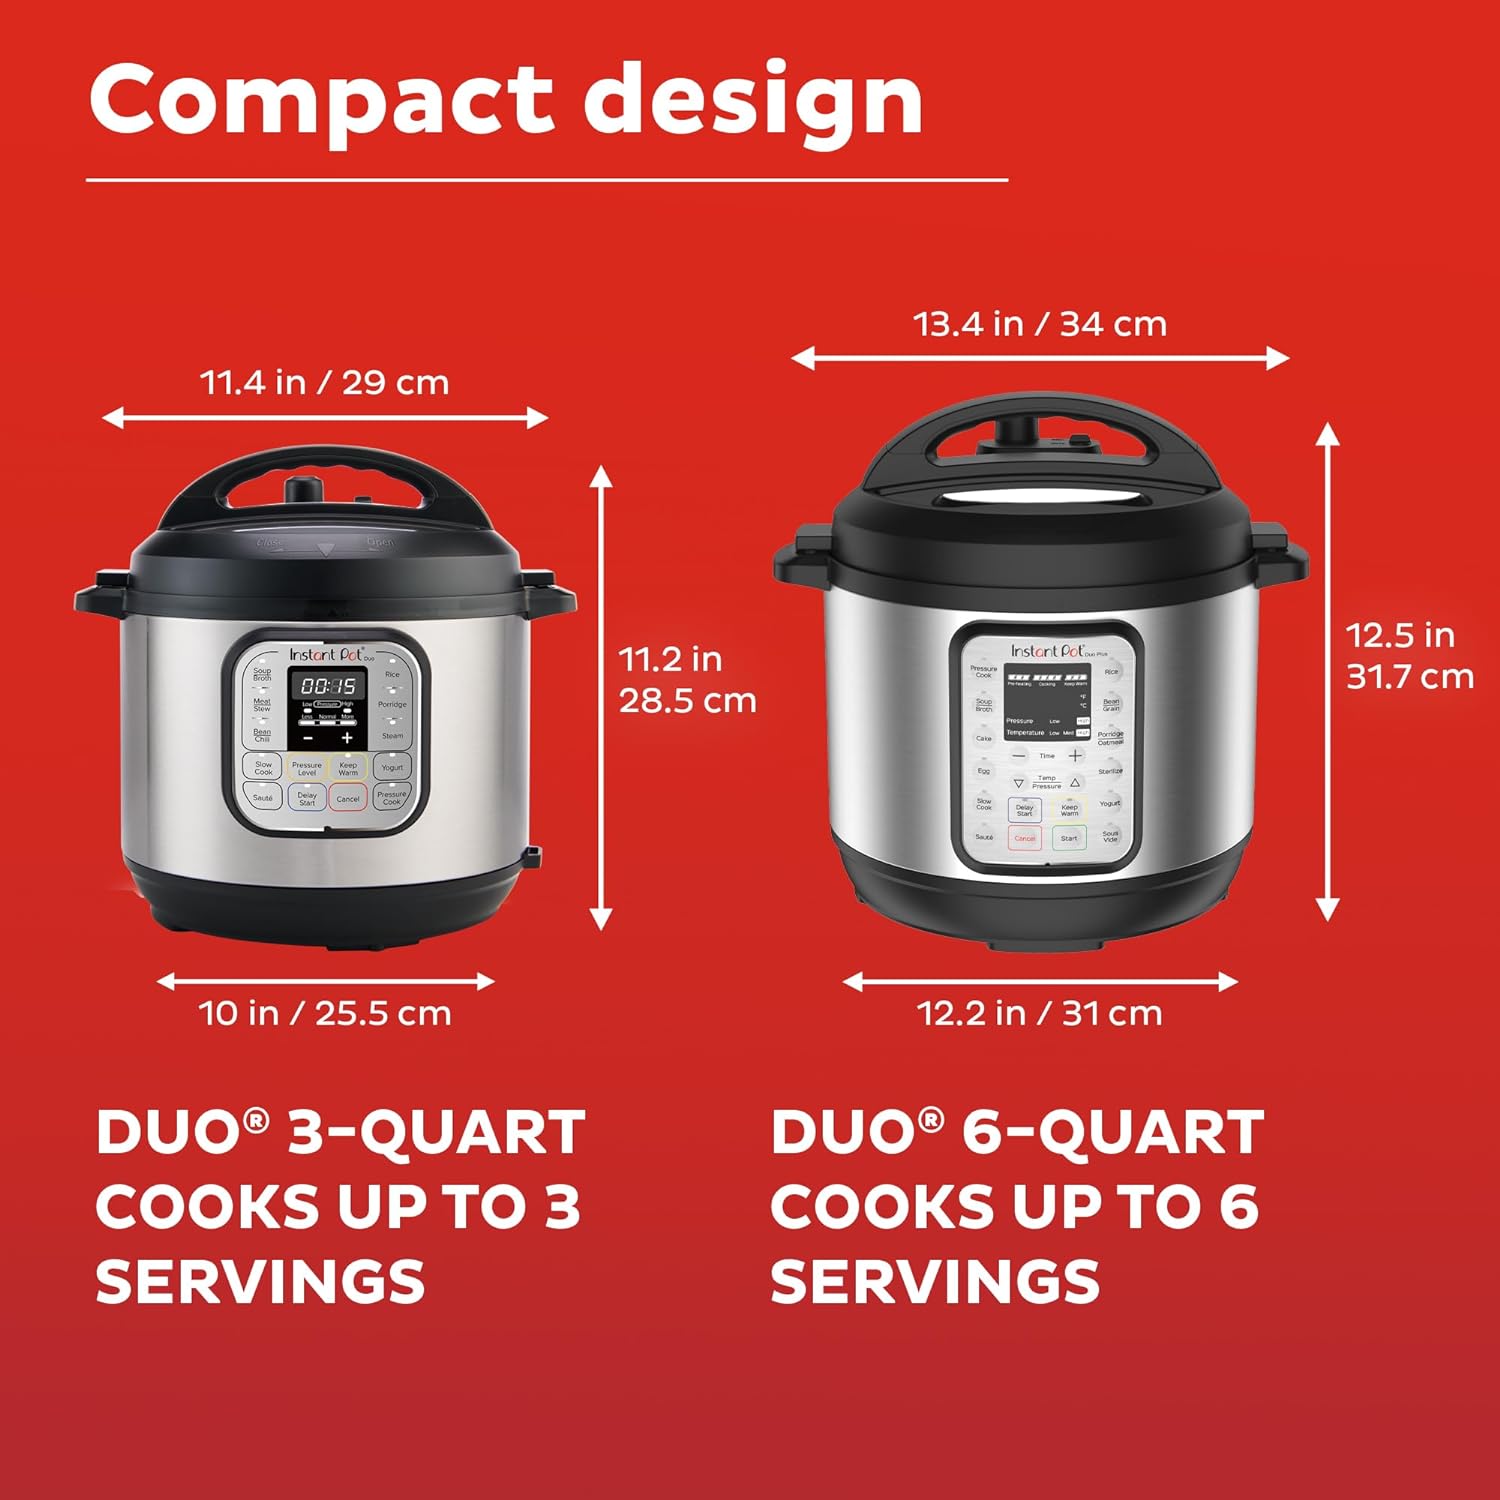 Instant Pot Duo 7-in-1 Electric Pressure Cooker, Slow Cooker, Rice Cooker, Steamer, Sauté, Yogurt Maker, Warmer & Sterilizer, Includes Free App with over 1900 Recipes, Stainless Steel, 3 Quart - image 8 of 9